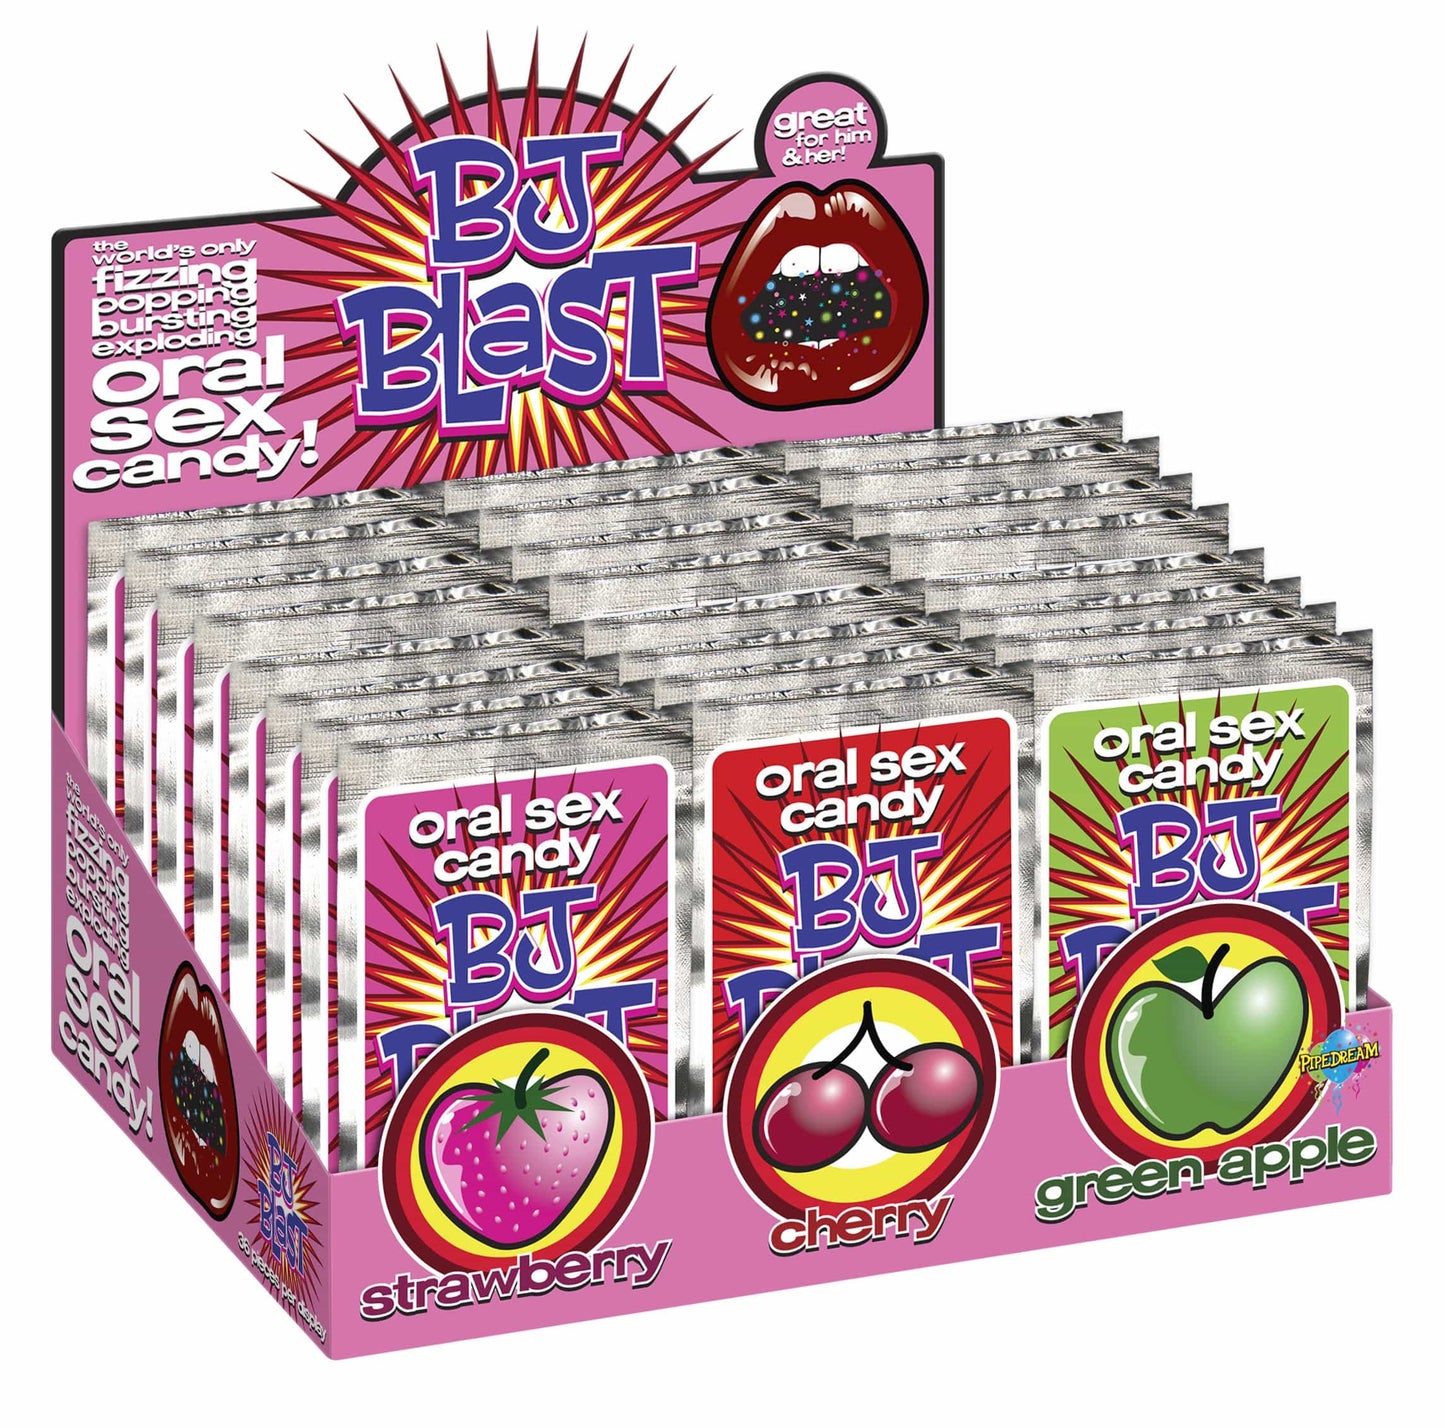 BJ Blast Oral Sex Candy - Strawberry, Cherry, Apple (36 Pieces) - Thorn & Feather